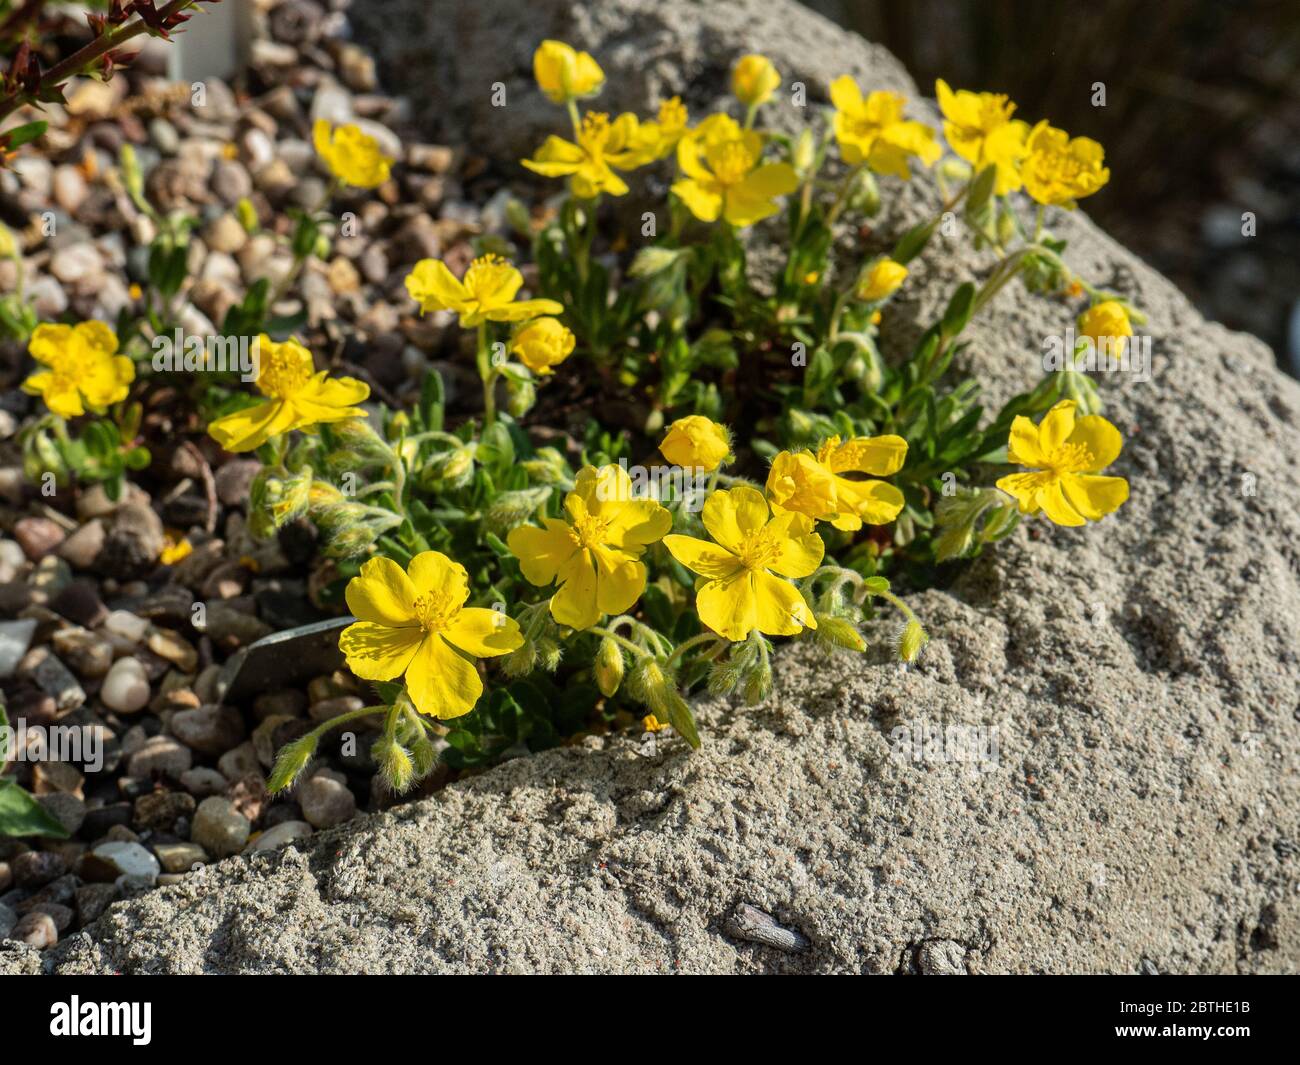 A plant of the yellow flowered Helianthemum lunulatum growing on the corner of a trough garden Stock Photo